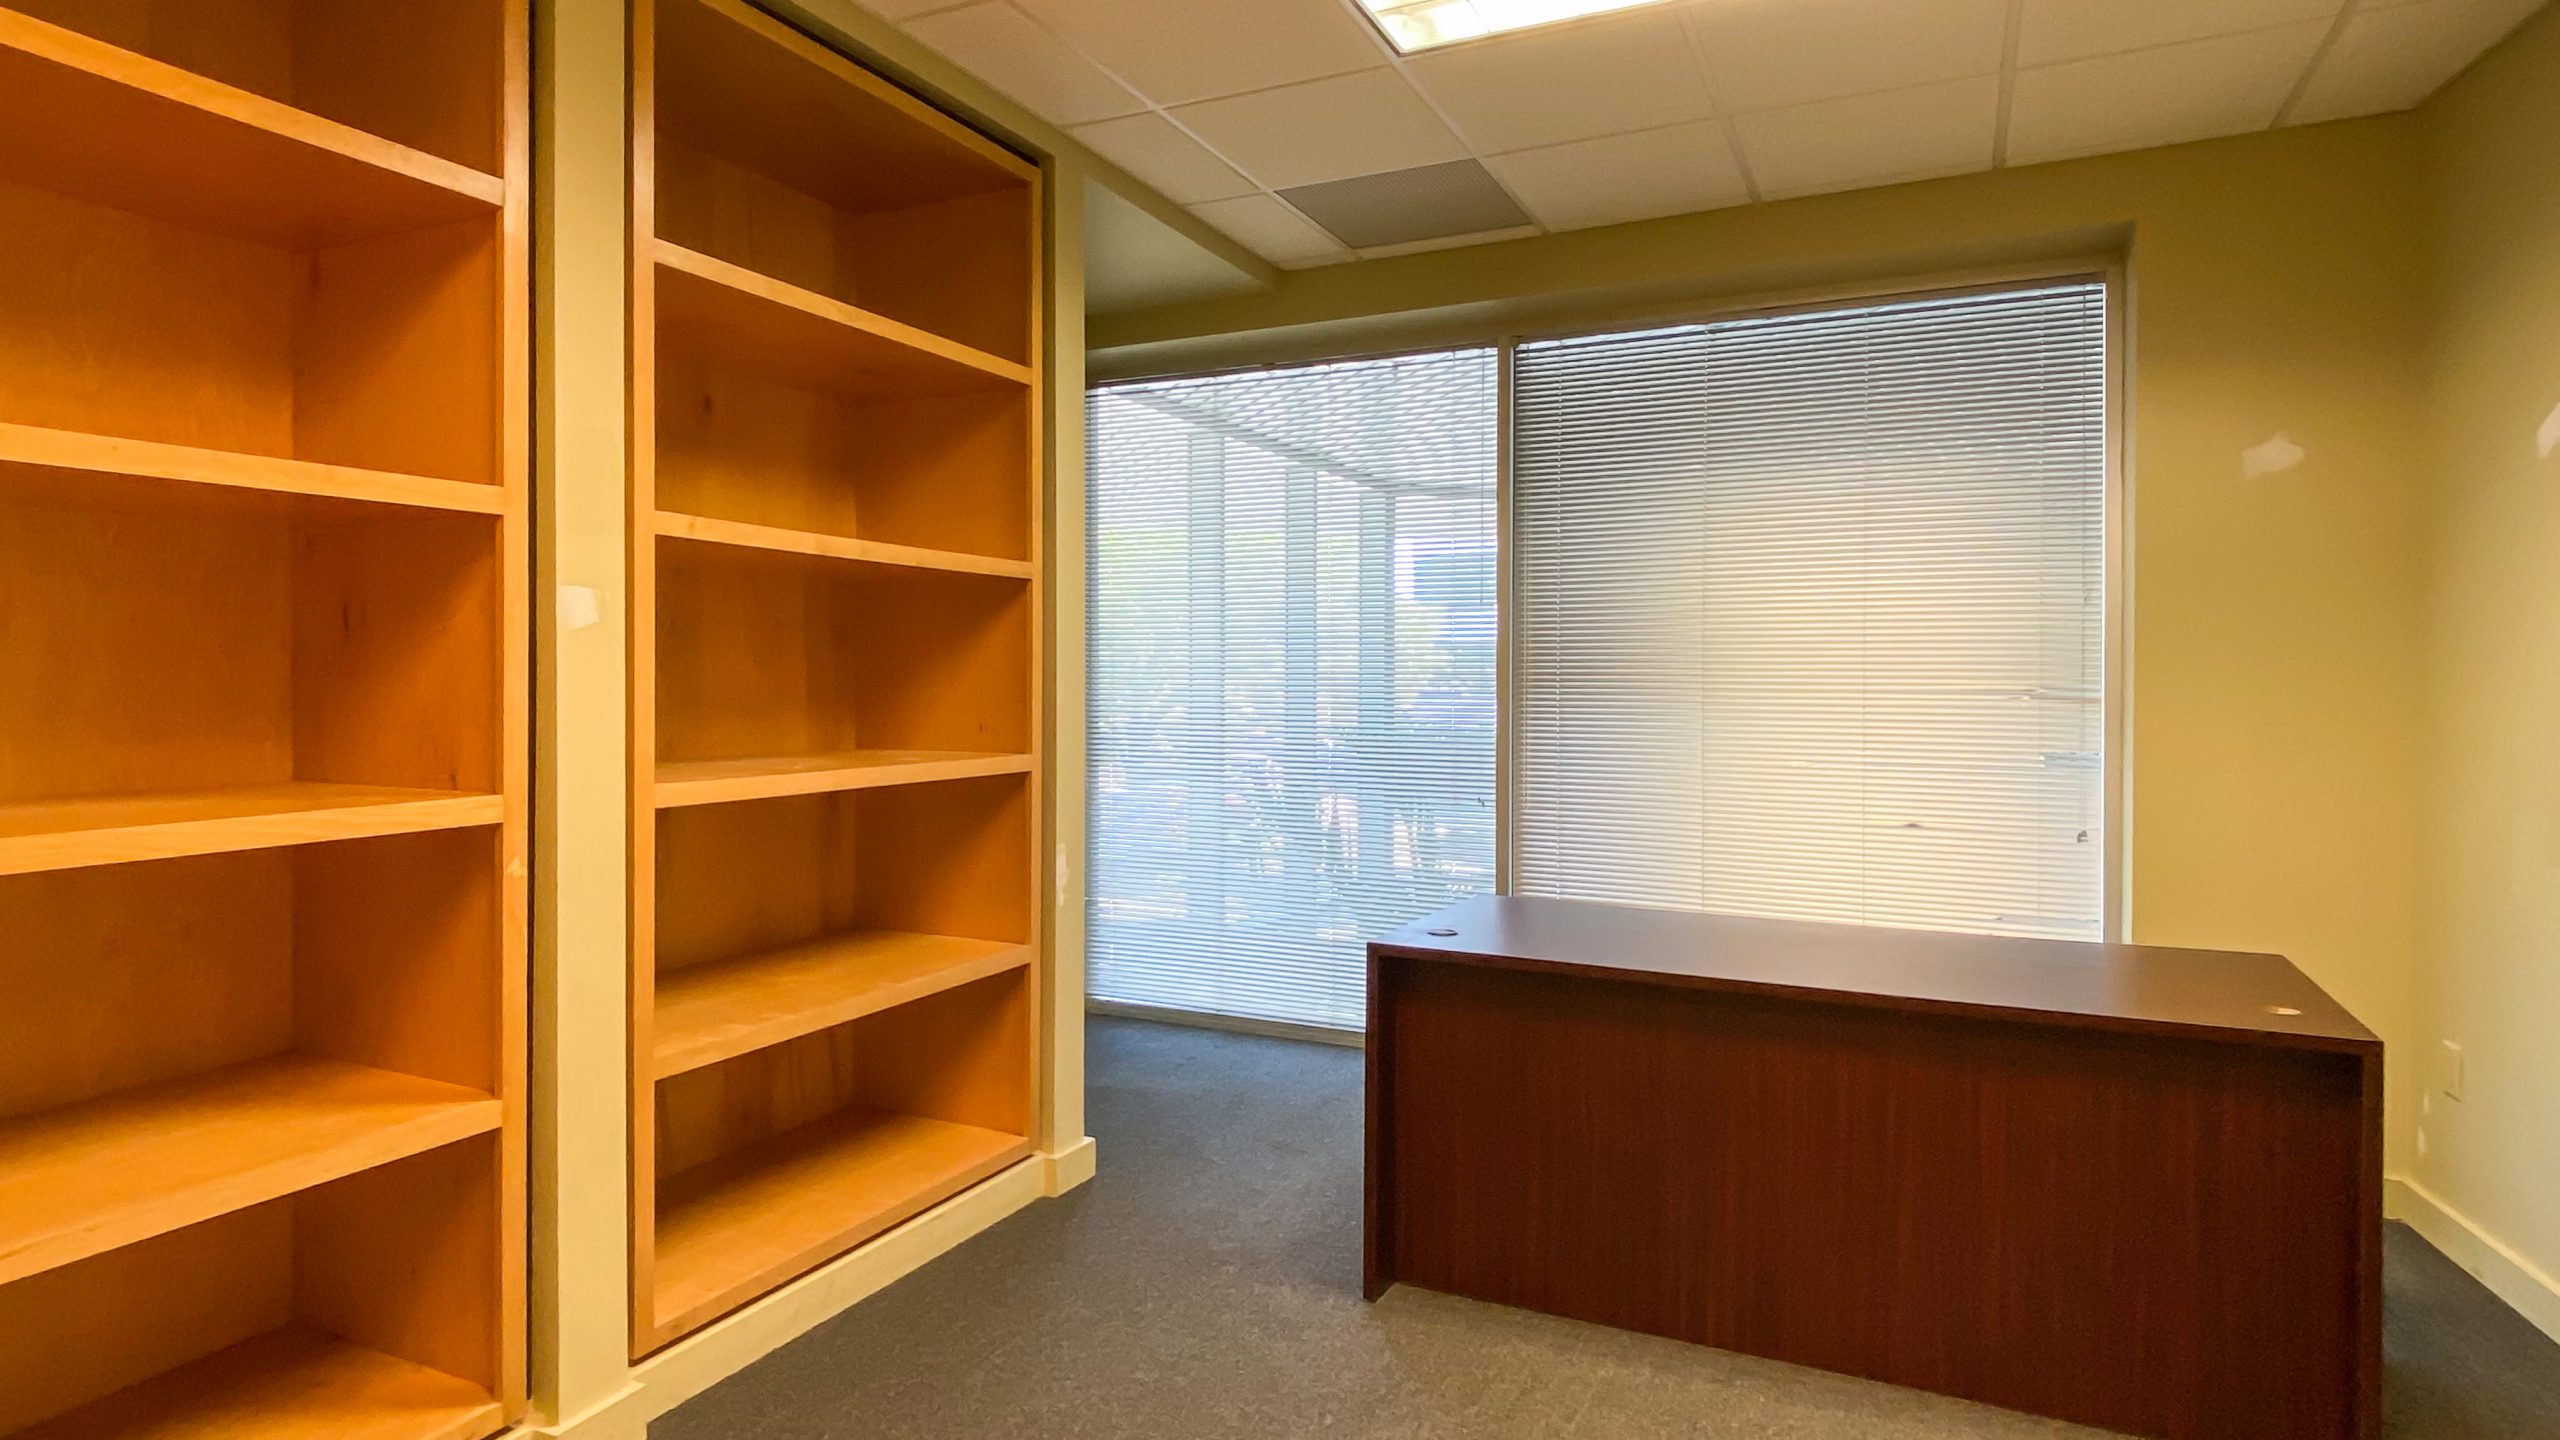 The interior of an office space for lease.